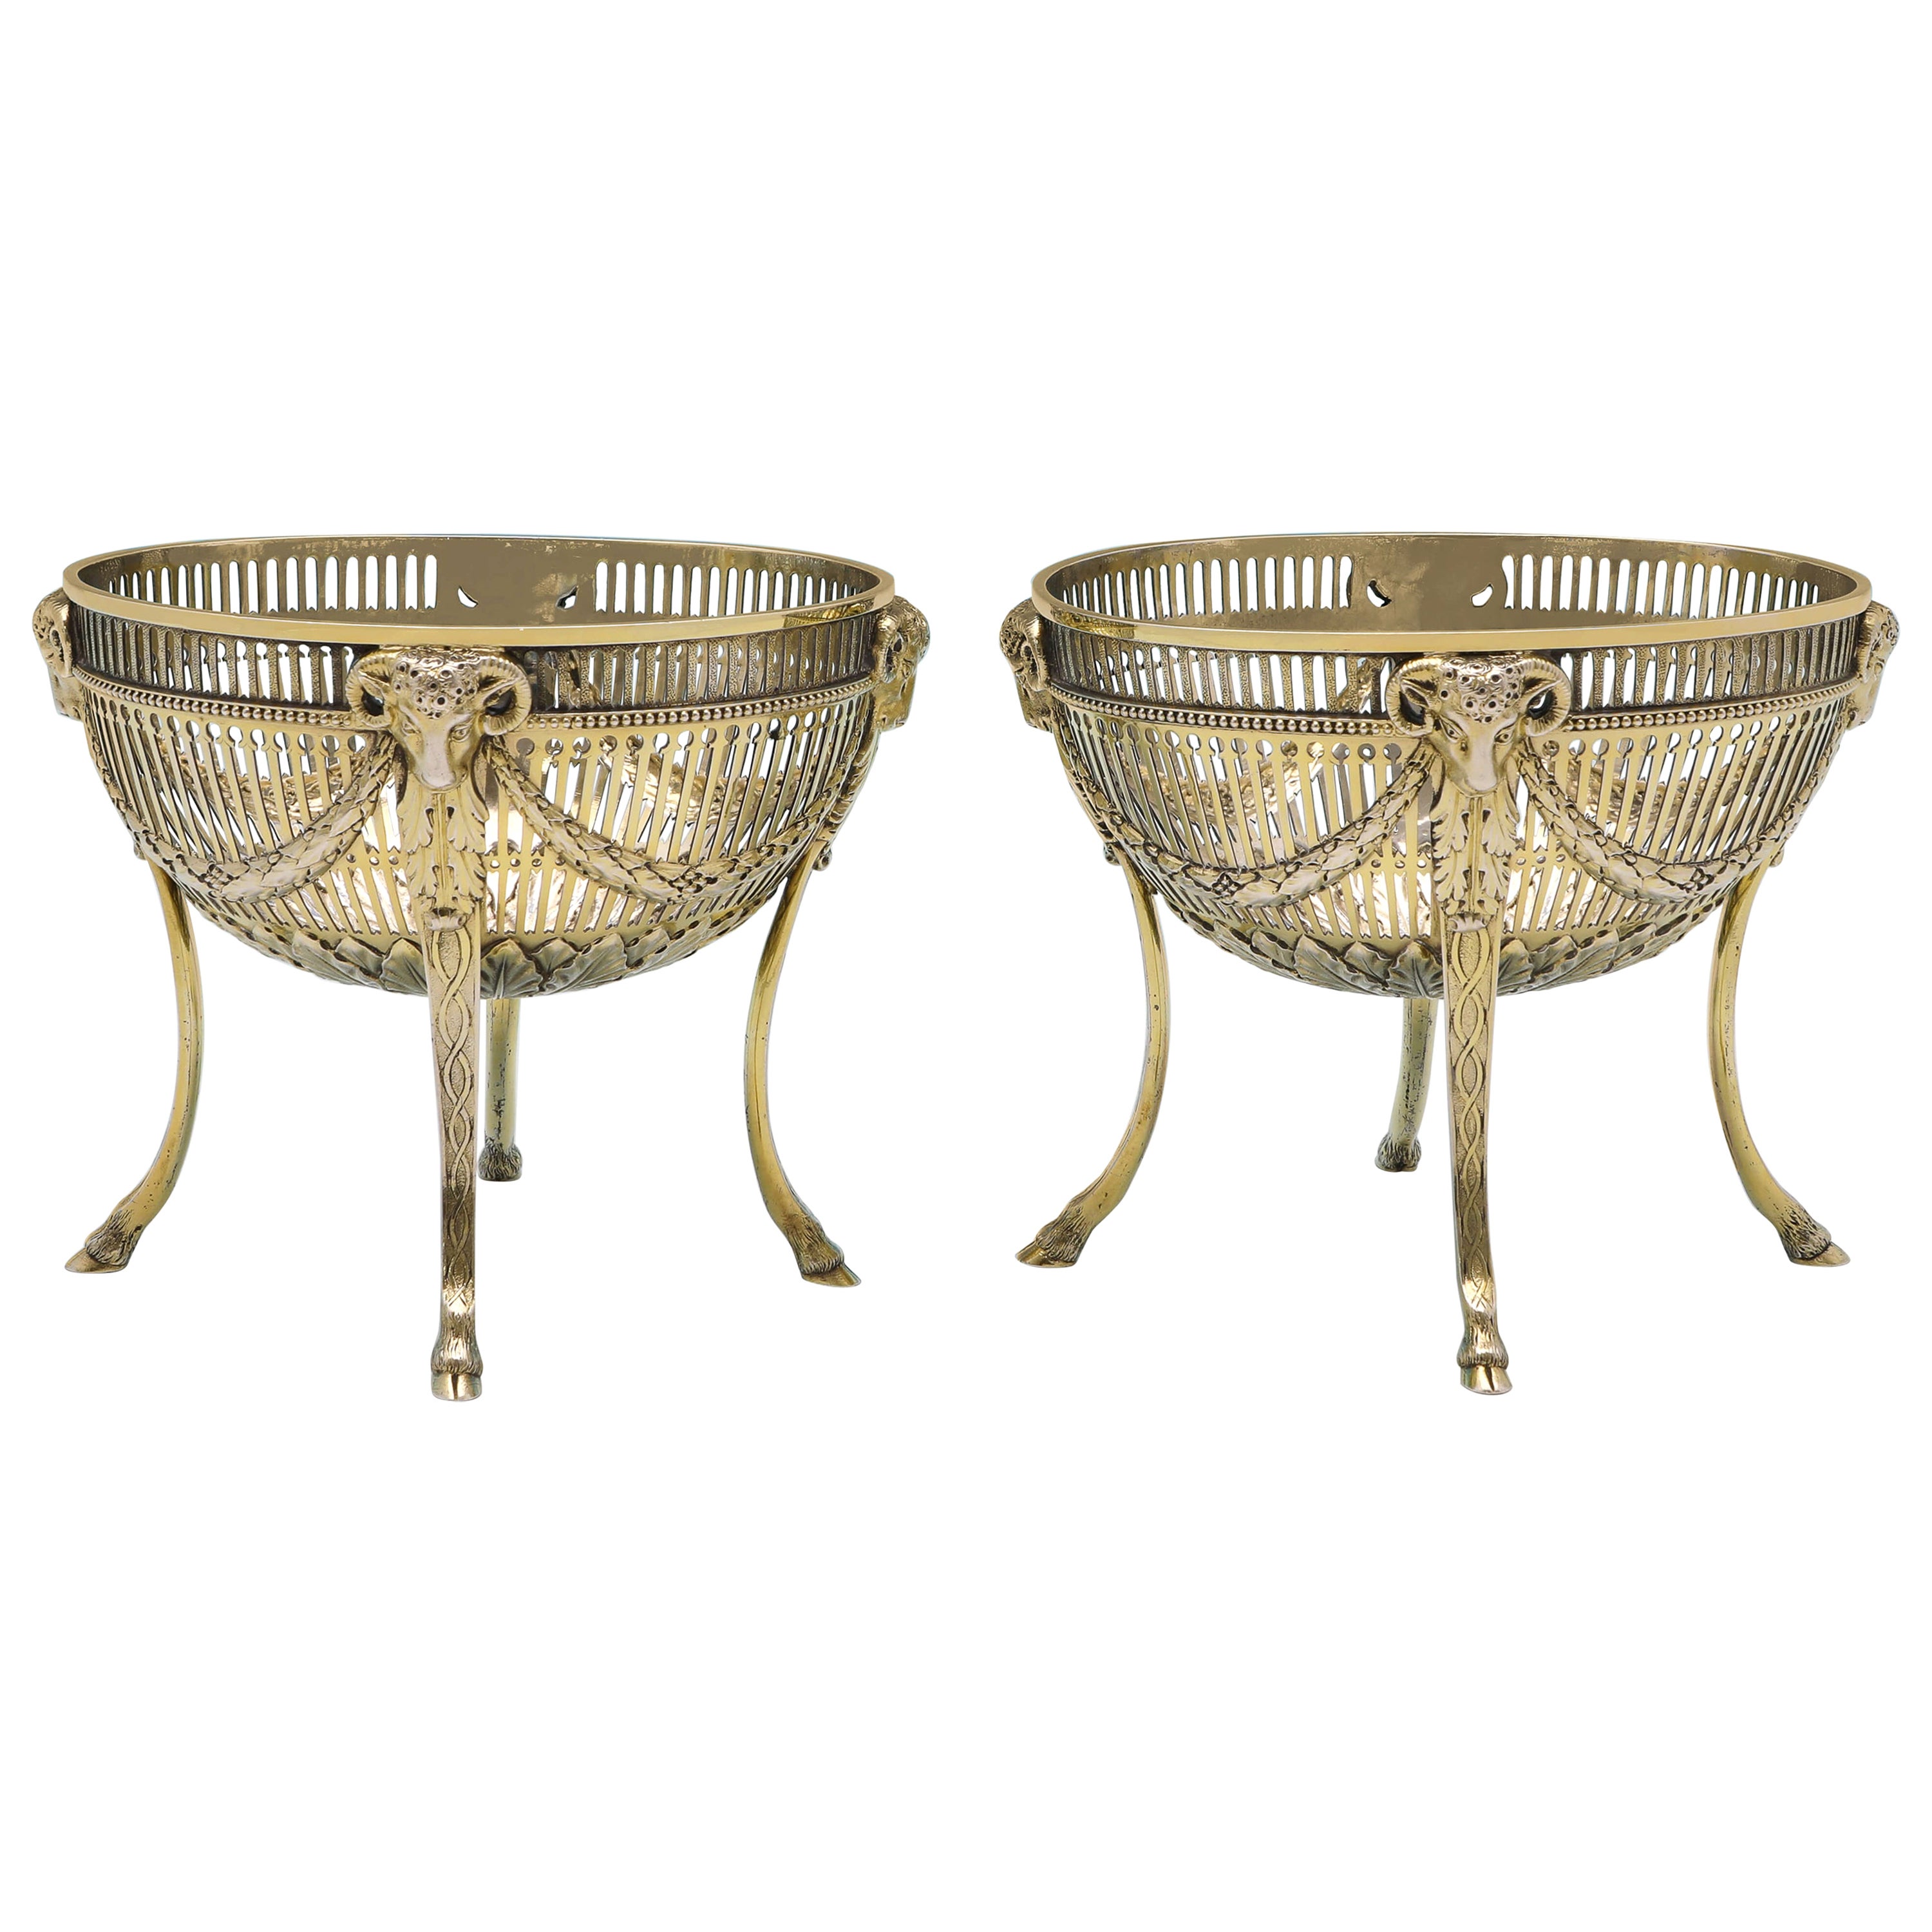 Neoclassical Revival Antique Gilt Sterling Silver Pair of Dishes, London, 1880 For Sale